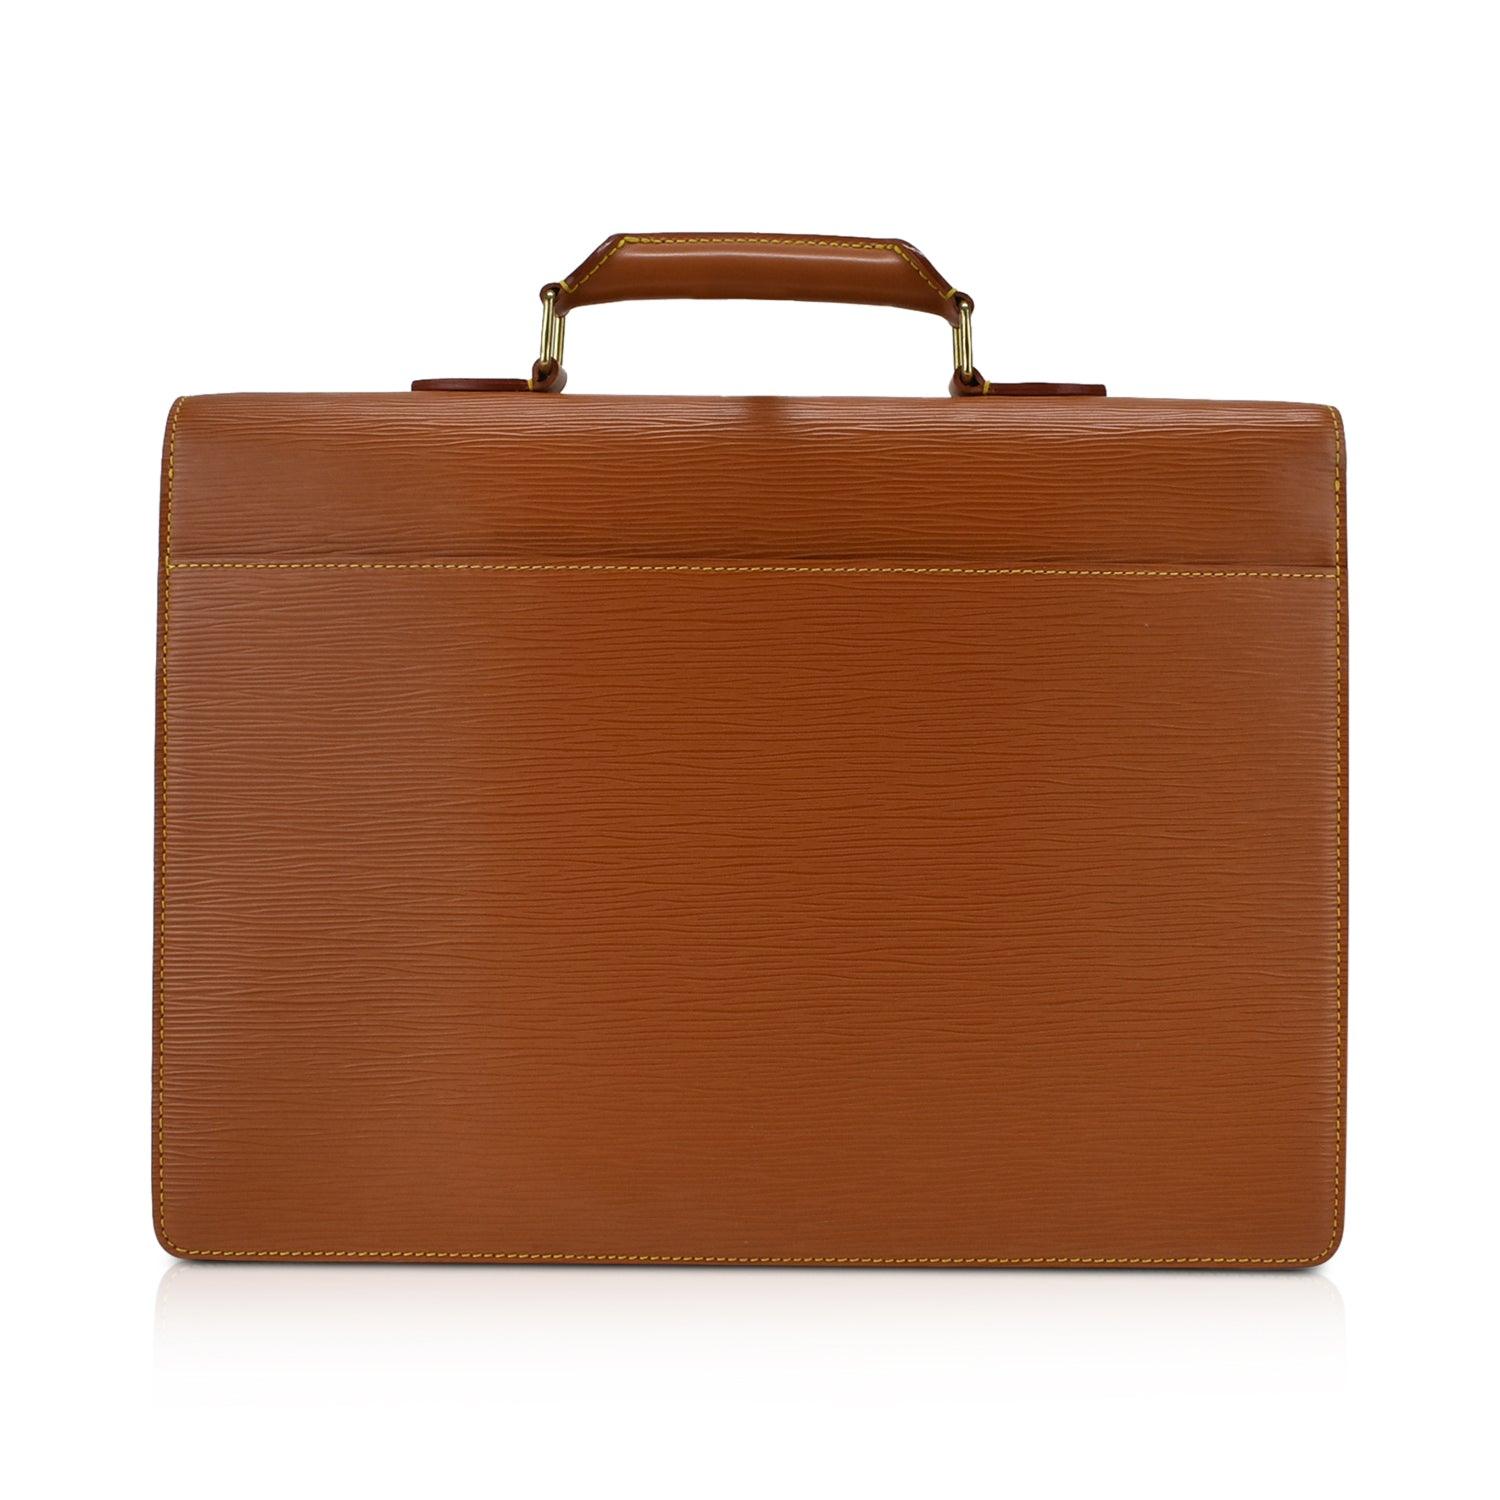 Louis Vuitton Briefcase - Fashionably Yours